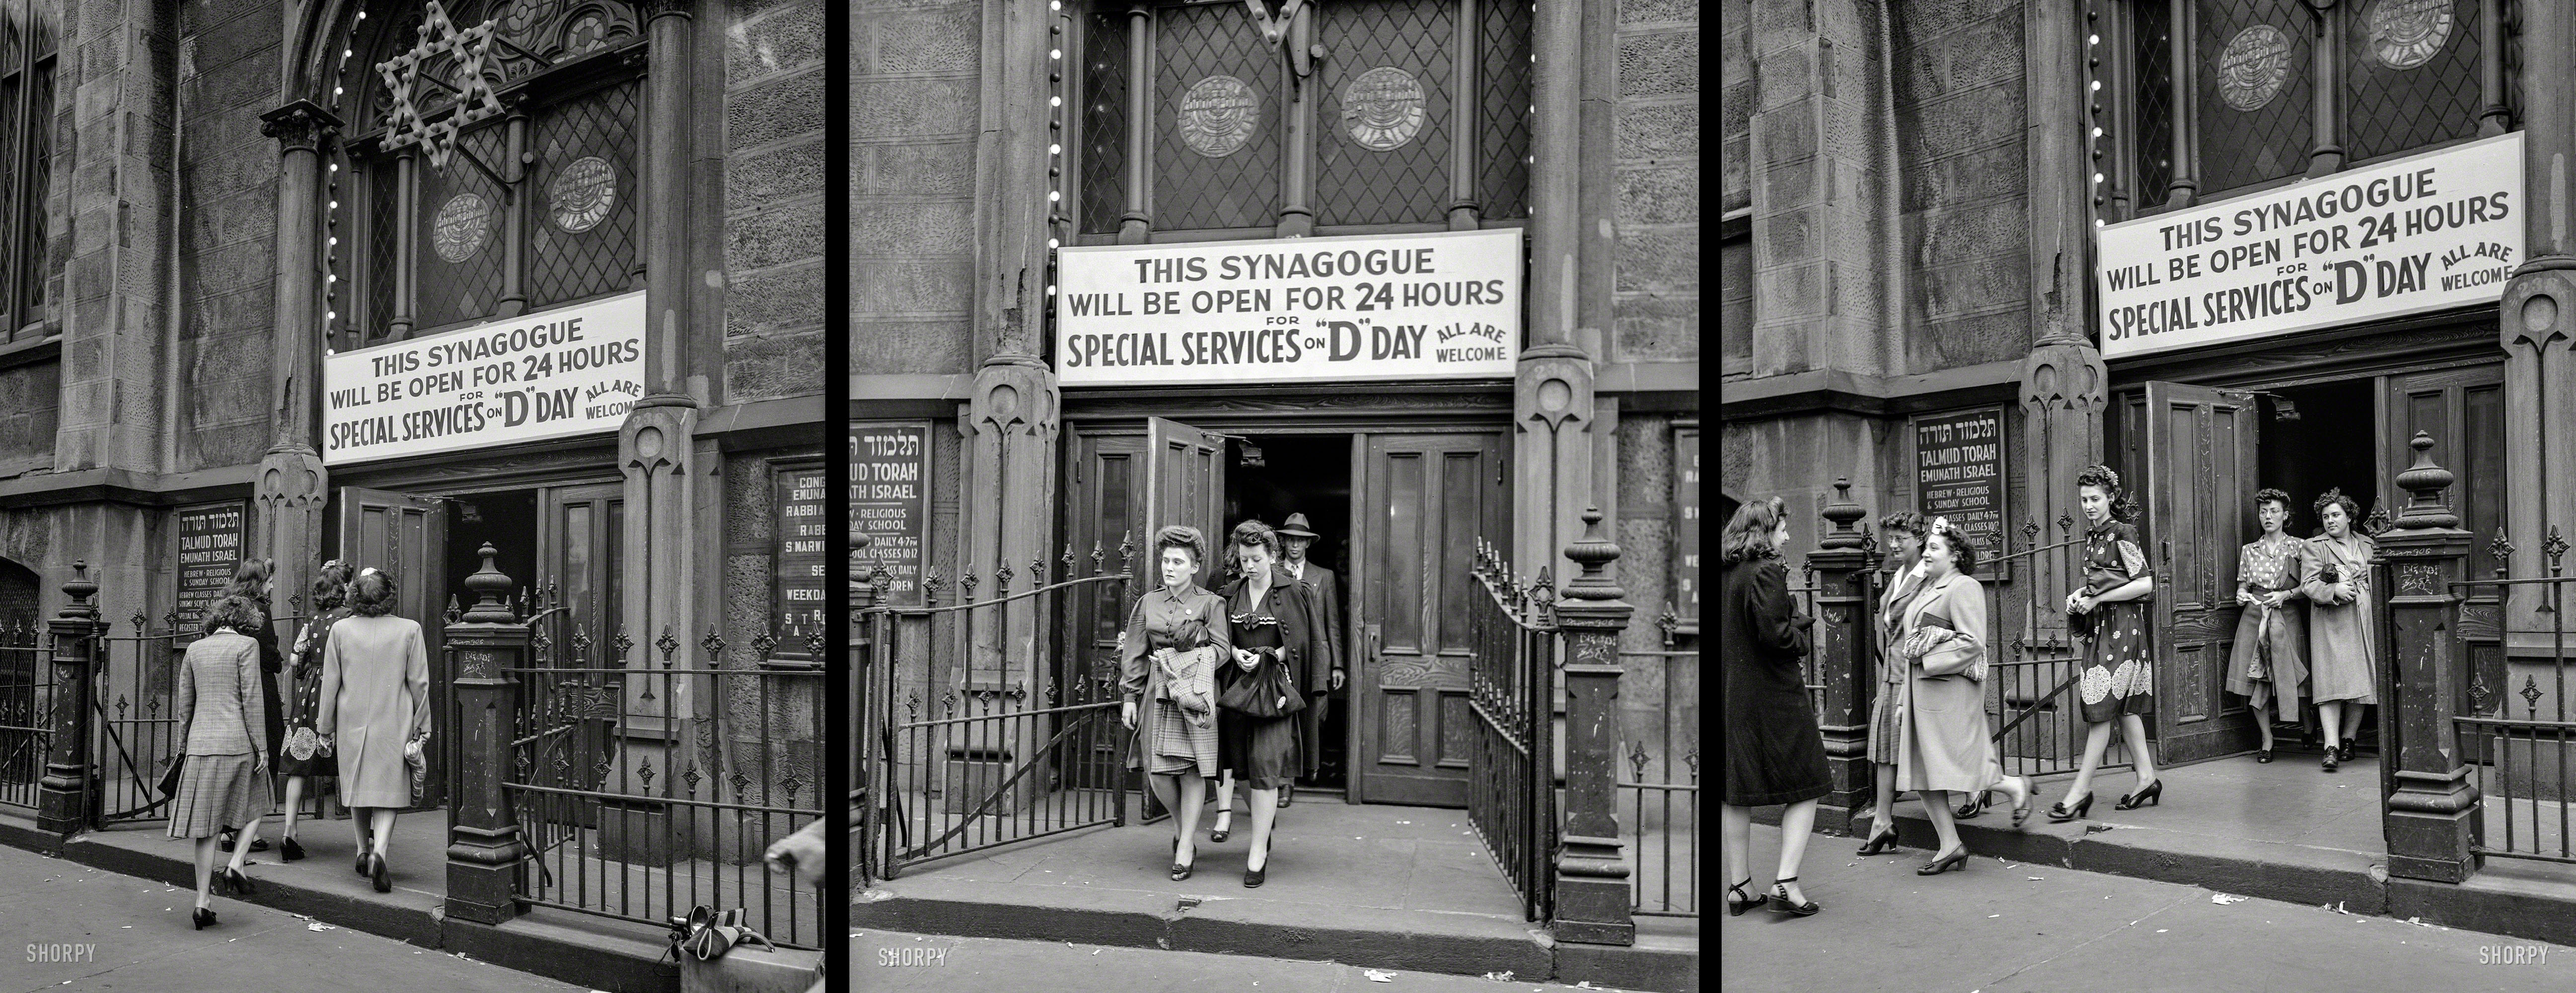 A D-Day triptych. "New York, New York. June 6, 1944. Congregation Emunath Israel. D-Day services in a synagogue on West 23rd Street." Photo by Howard Hollem et al. for the Office of War Information. View full size.